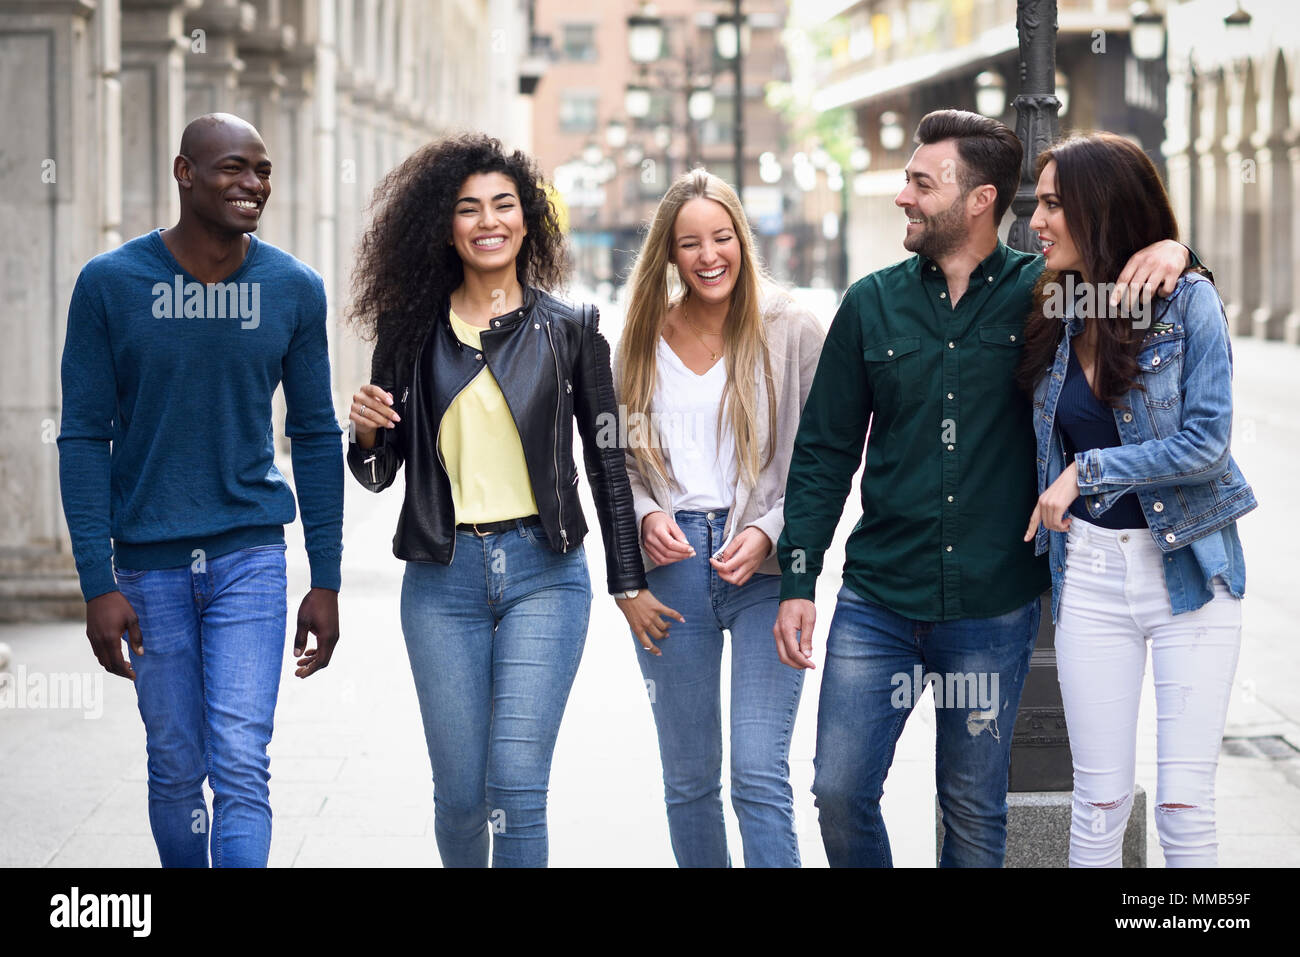 Multi-ethnic group of young people having fun together outdoors in urban background. group of people walking together Stock Photo